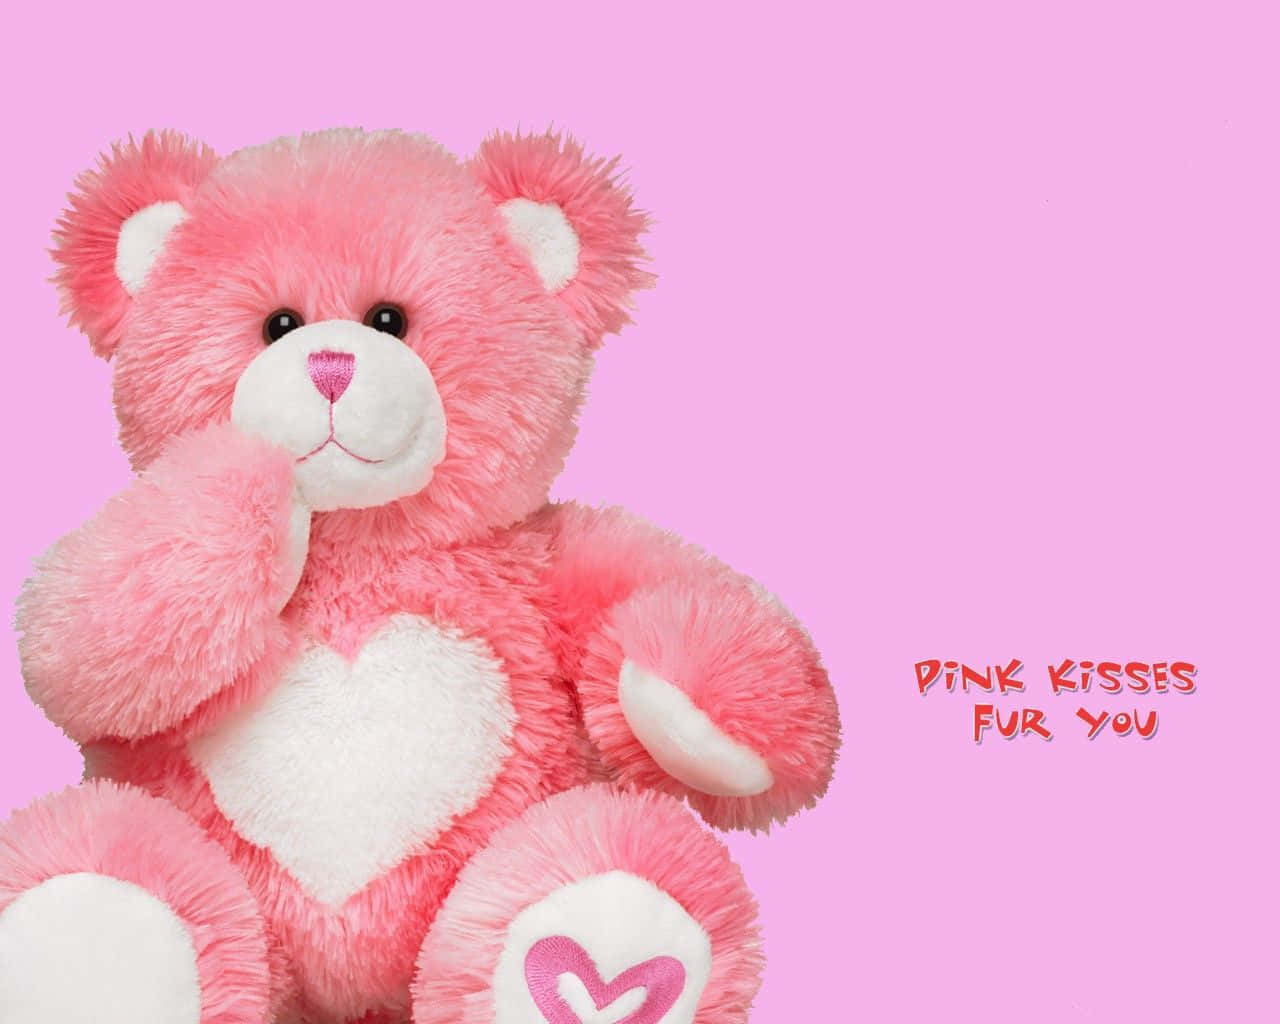 Cute Pink Teddy Bear Kisses Valentine's Day Background